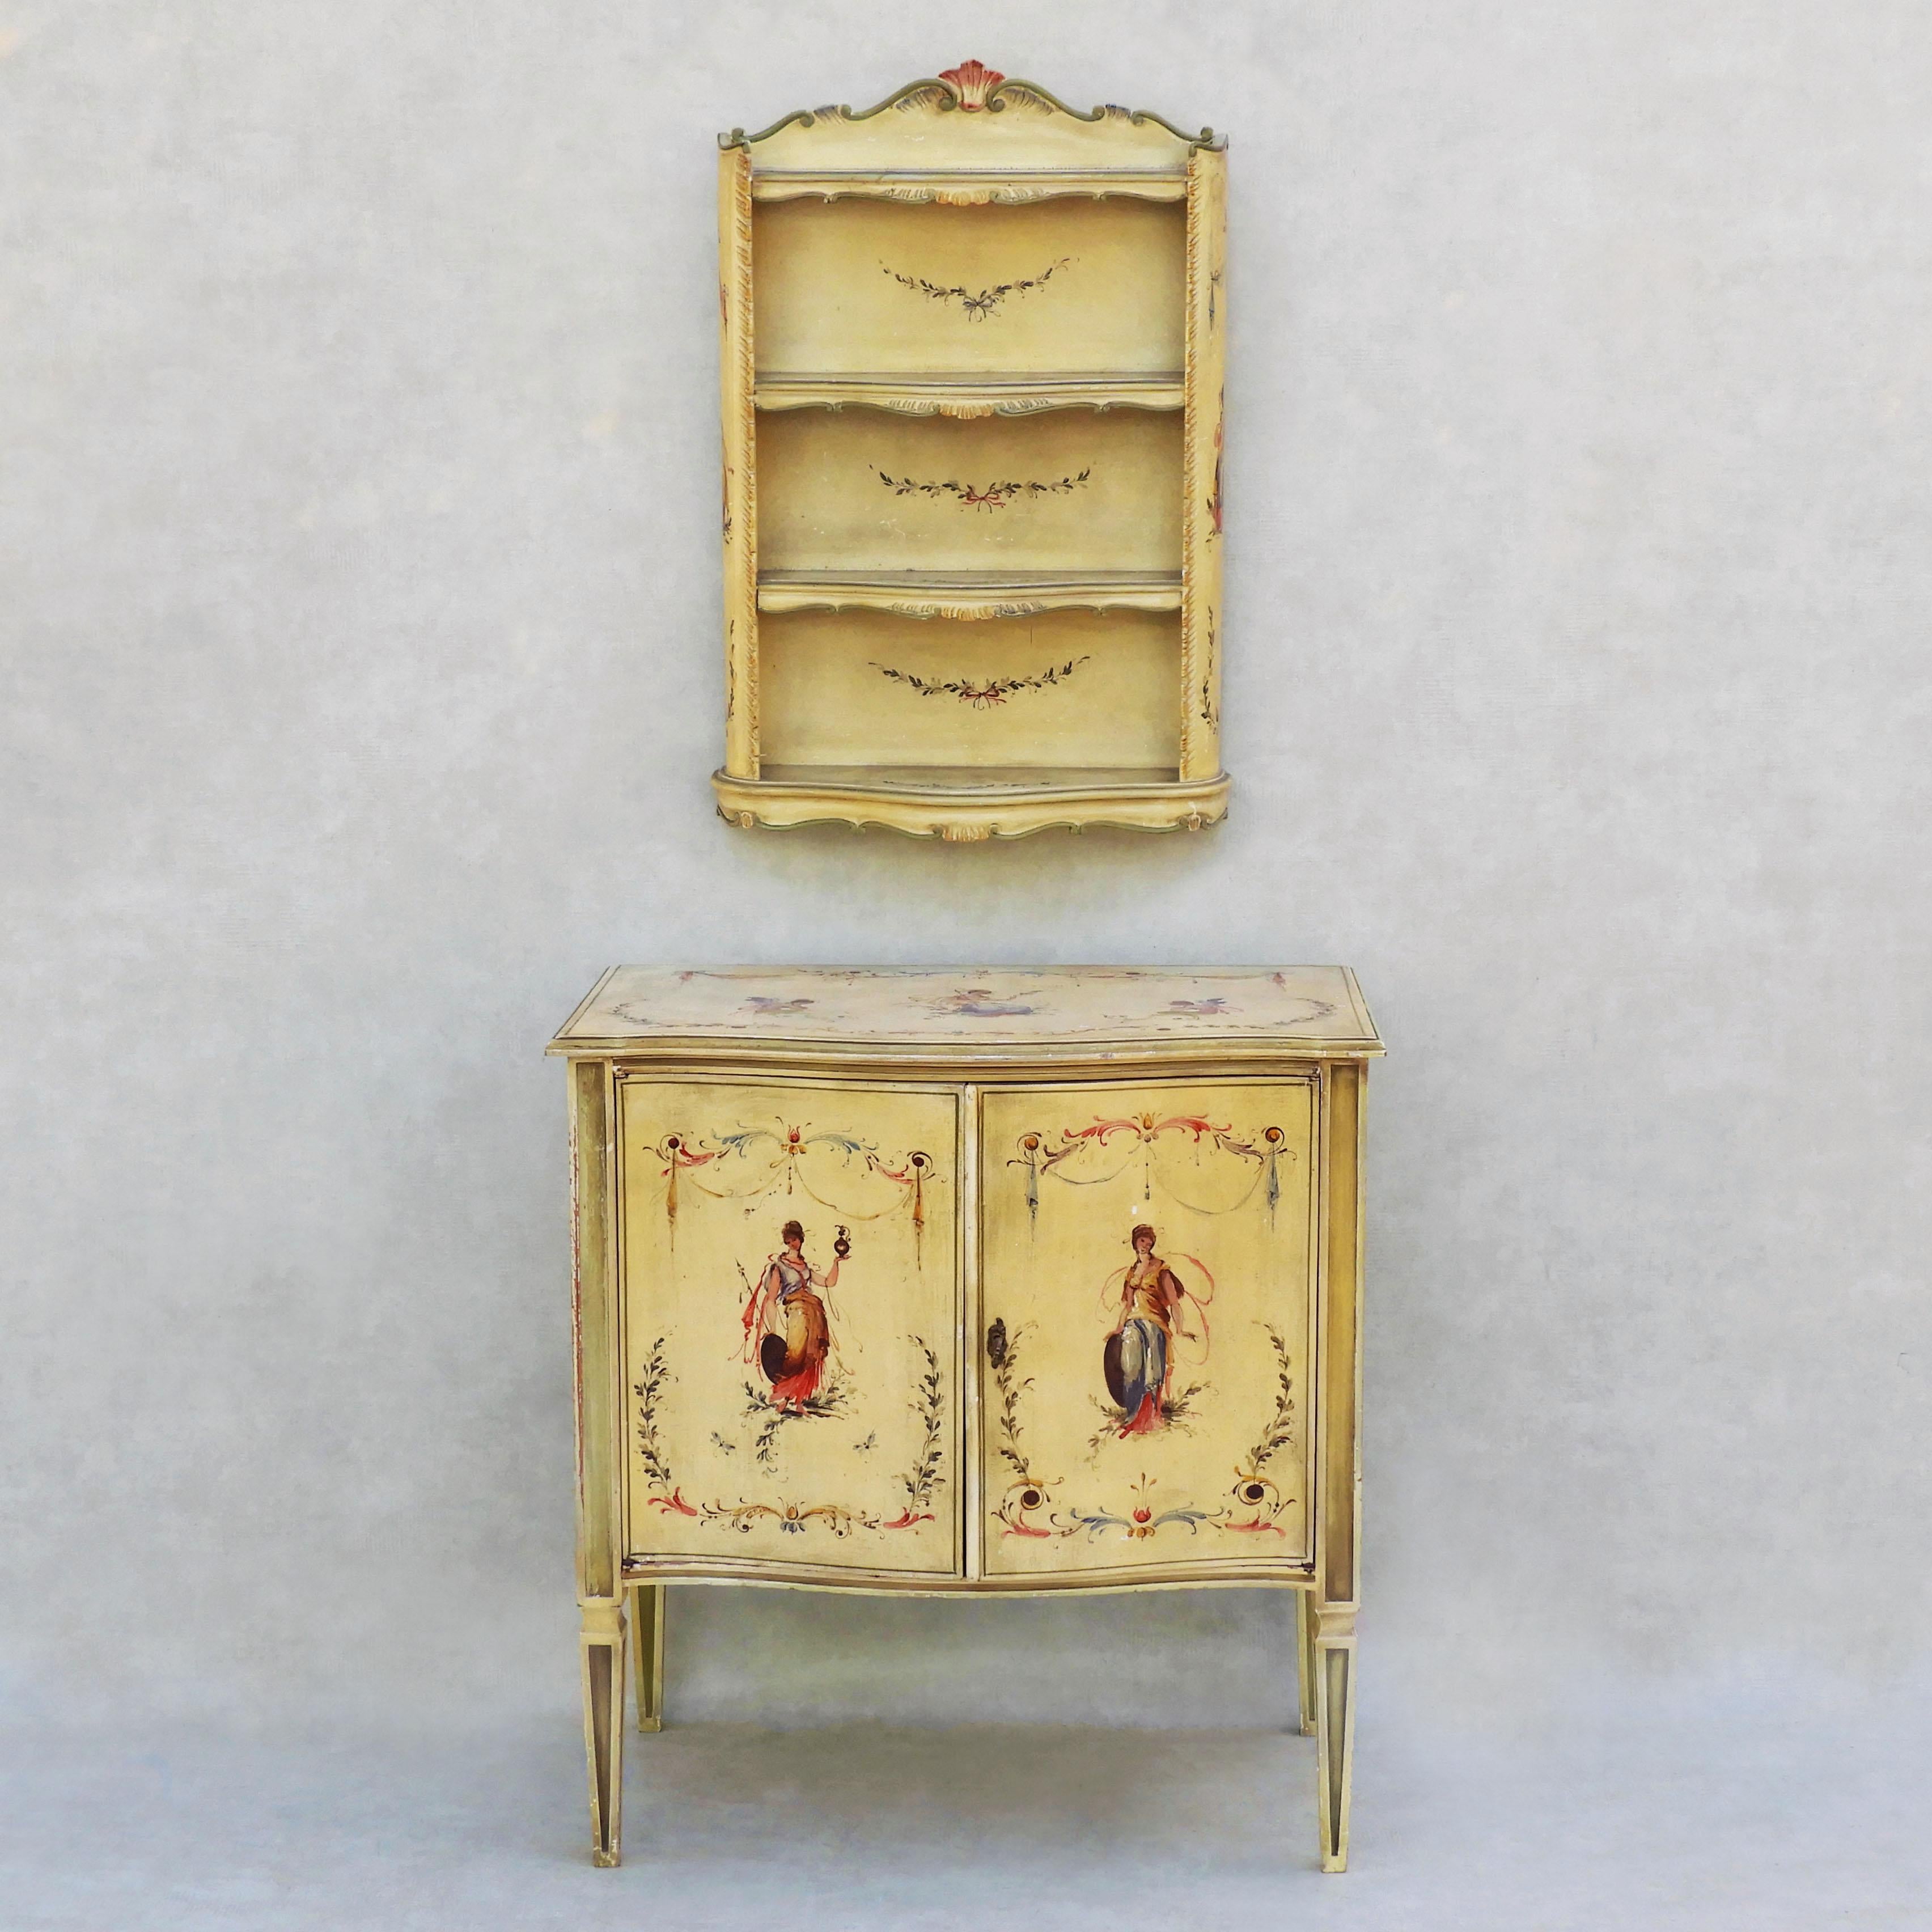 Italian hand-painted ensemble C1960
Beautiful Venetian style painted Cabinet and shelf ensemble, c1960s Italy.
Simple neoclassical style cabinet and complimentary shelf unit, beautifully hand-painted with figurative, floral and scrollwork